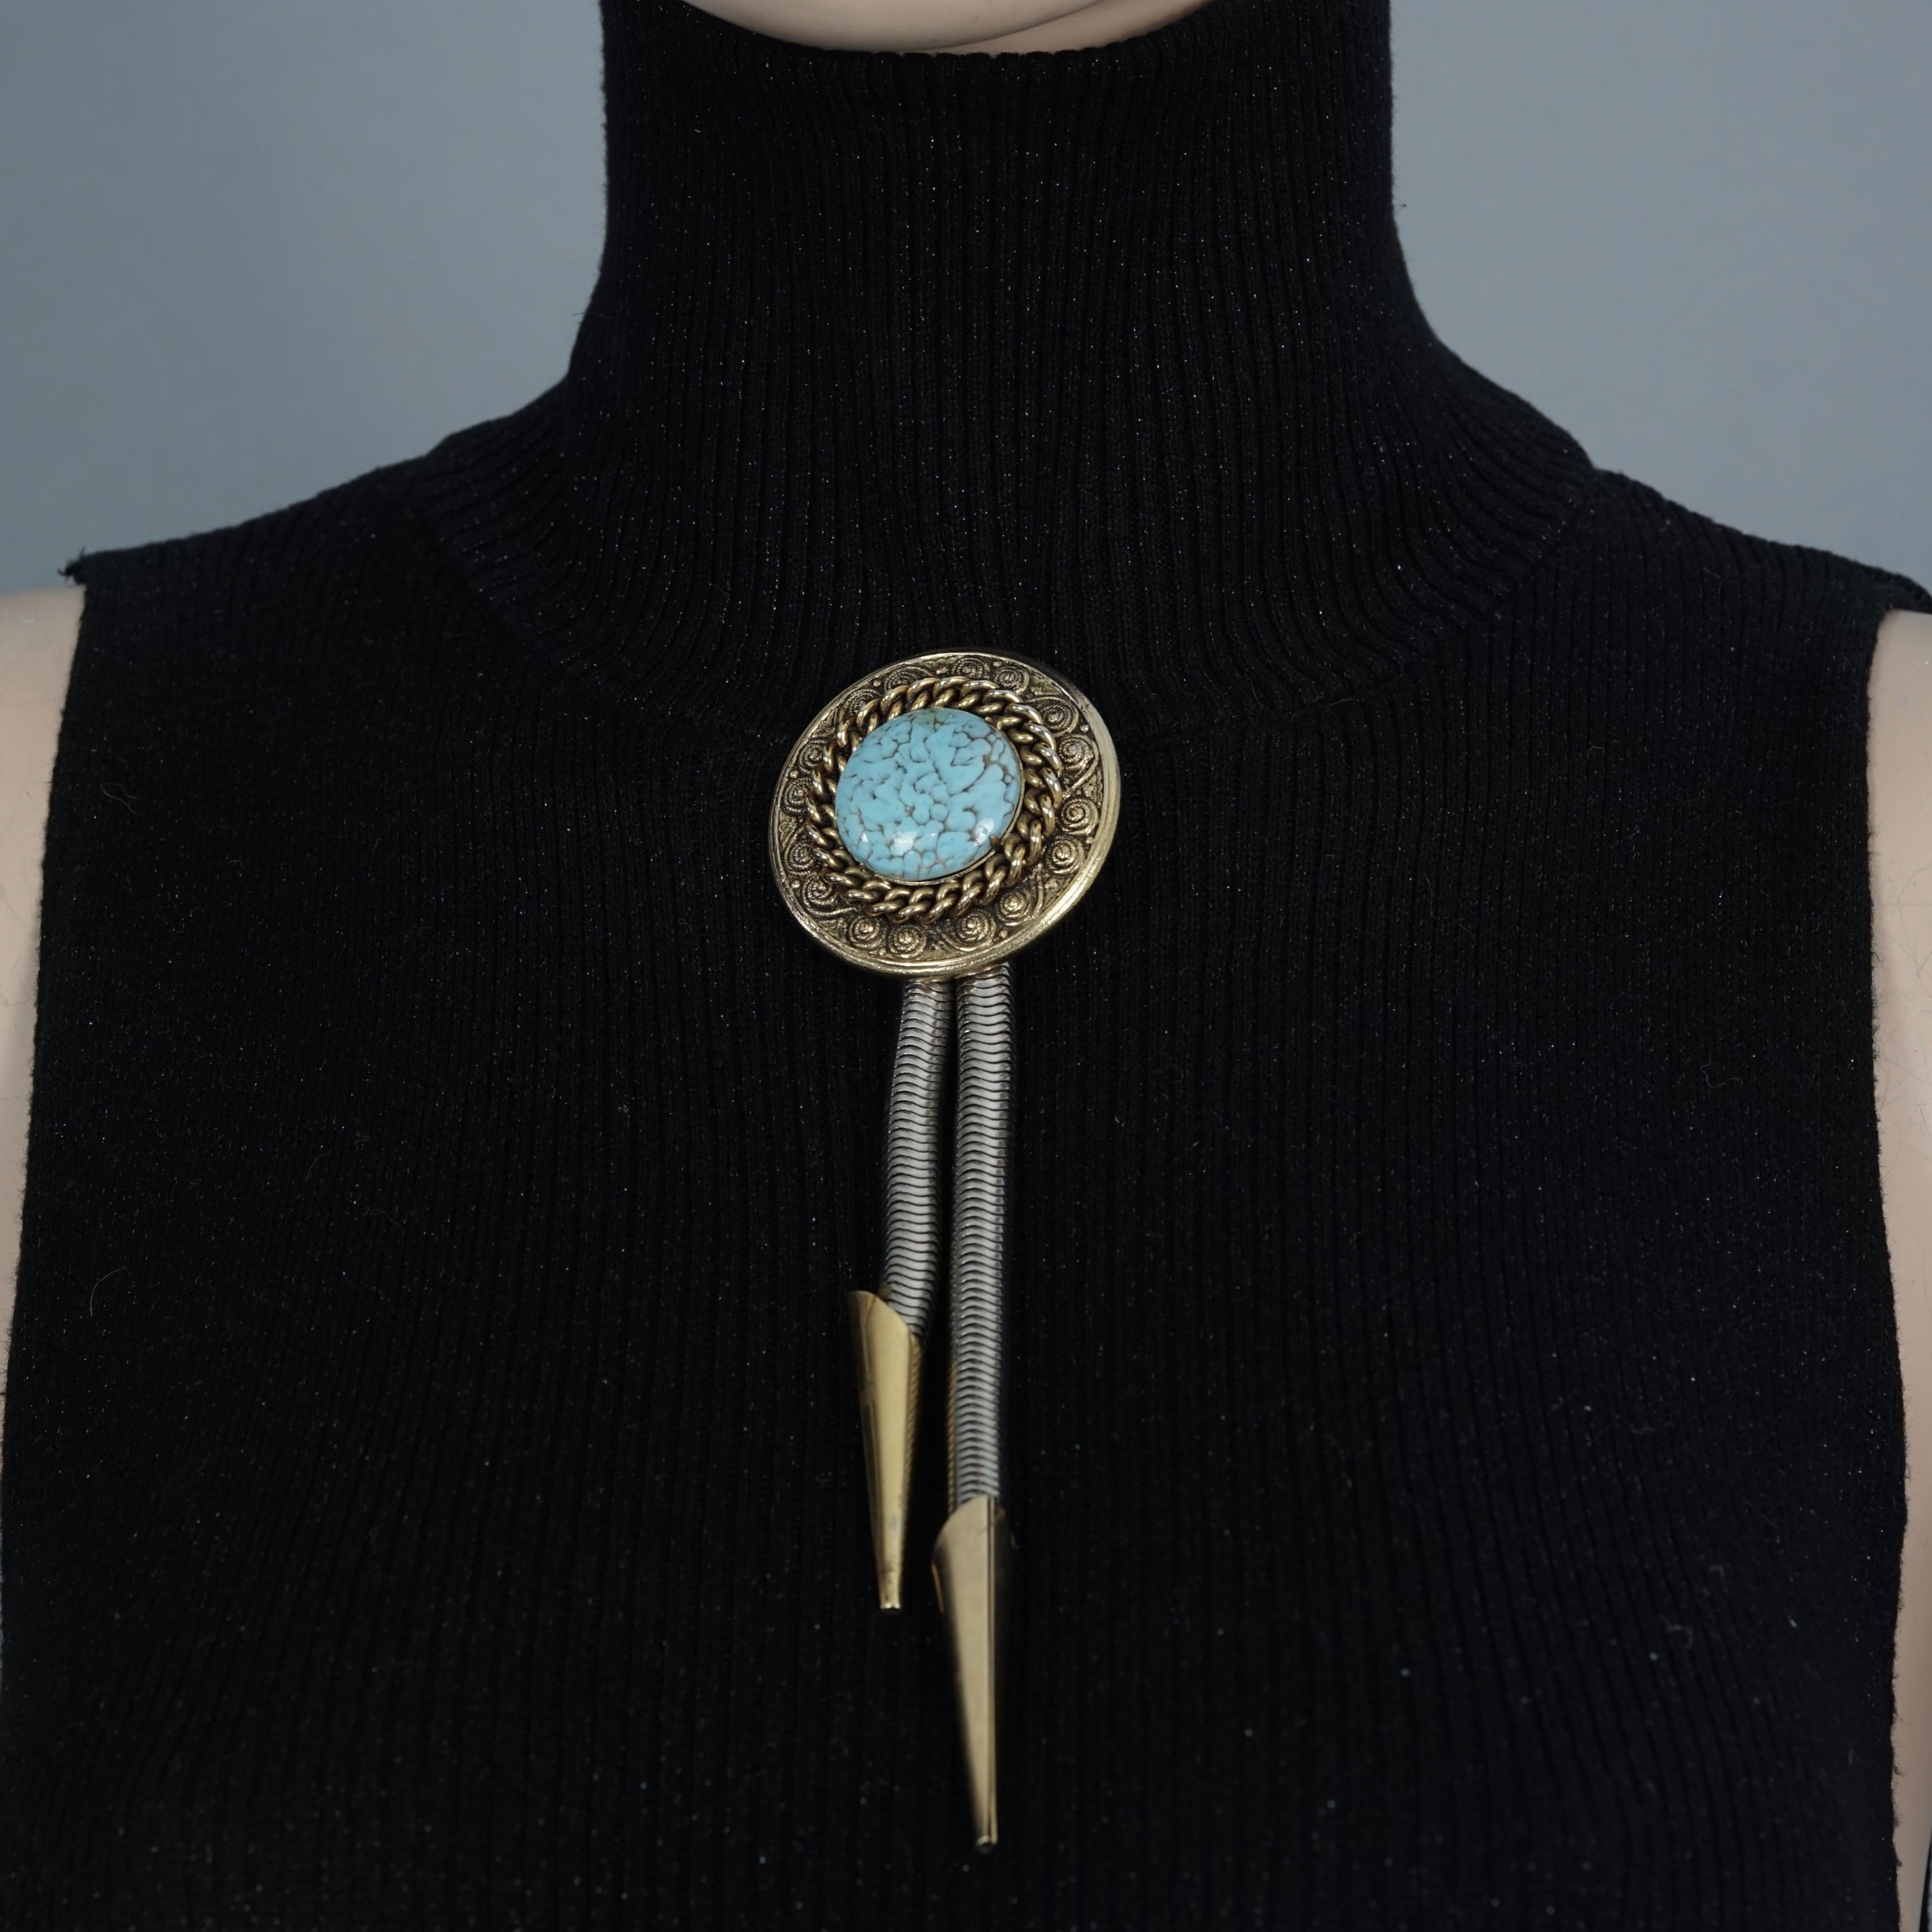 Vintage EDOUARD RAMBAUD Turquoise Medallion Bolo Tie Brooch

Measurements:
Height: 6.69 inches (17 cm)
Diameter Medallion: 1.92 inches (4.9 cm)

Features:
- 100% Authentic EDOUARD RAMBAUD PARIS.
- Wester bolo tie/ bootlace tie brooch with turquoise